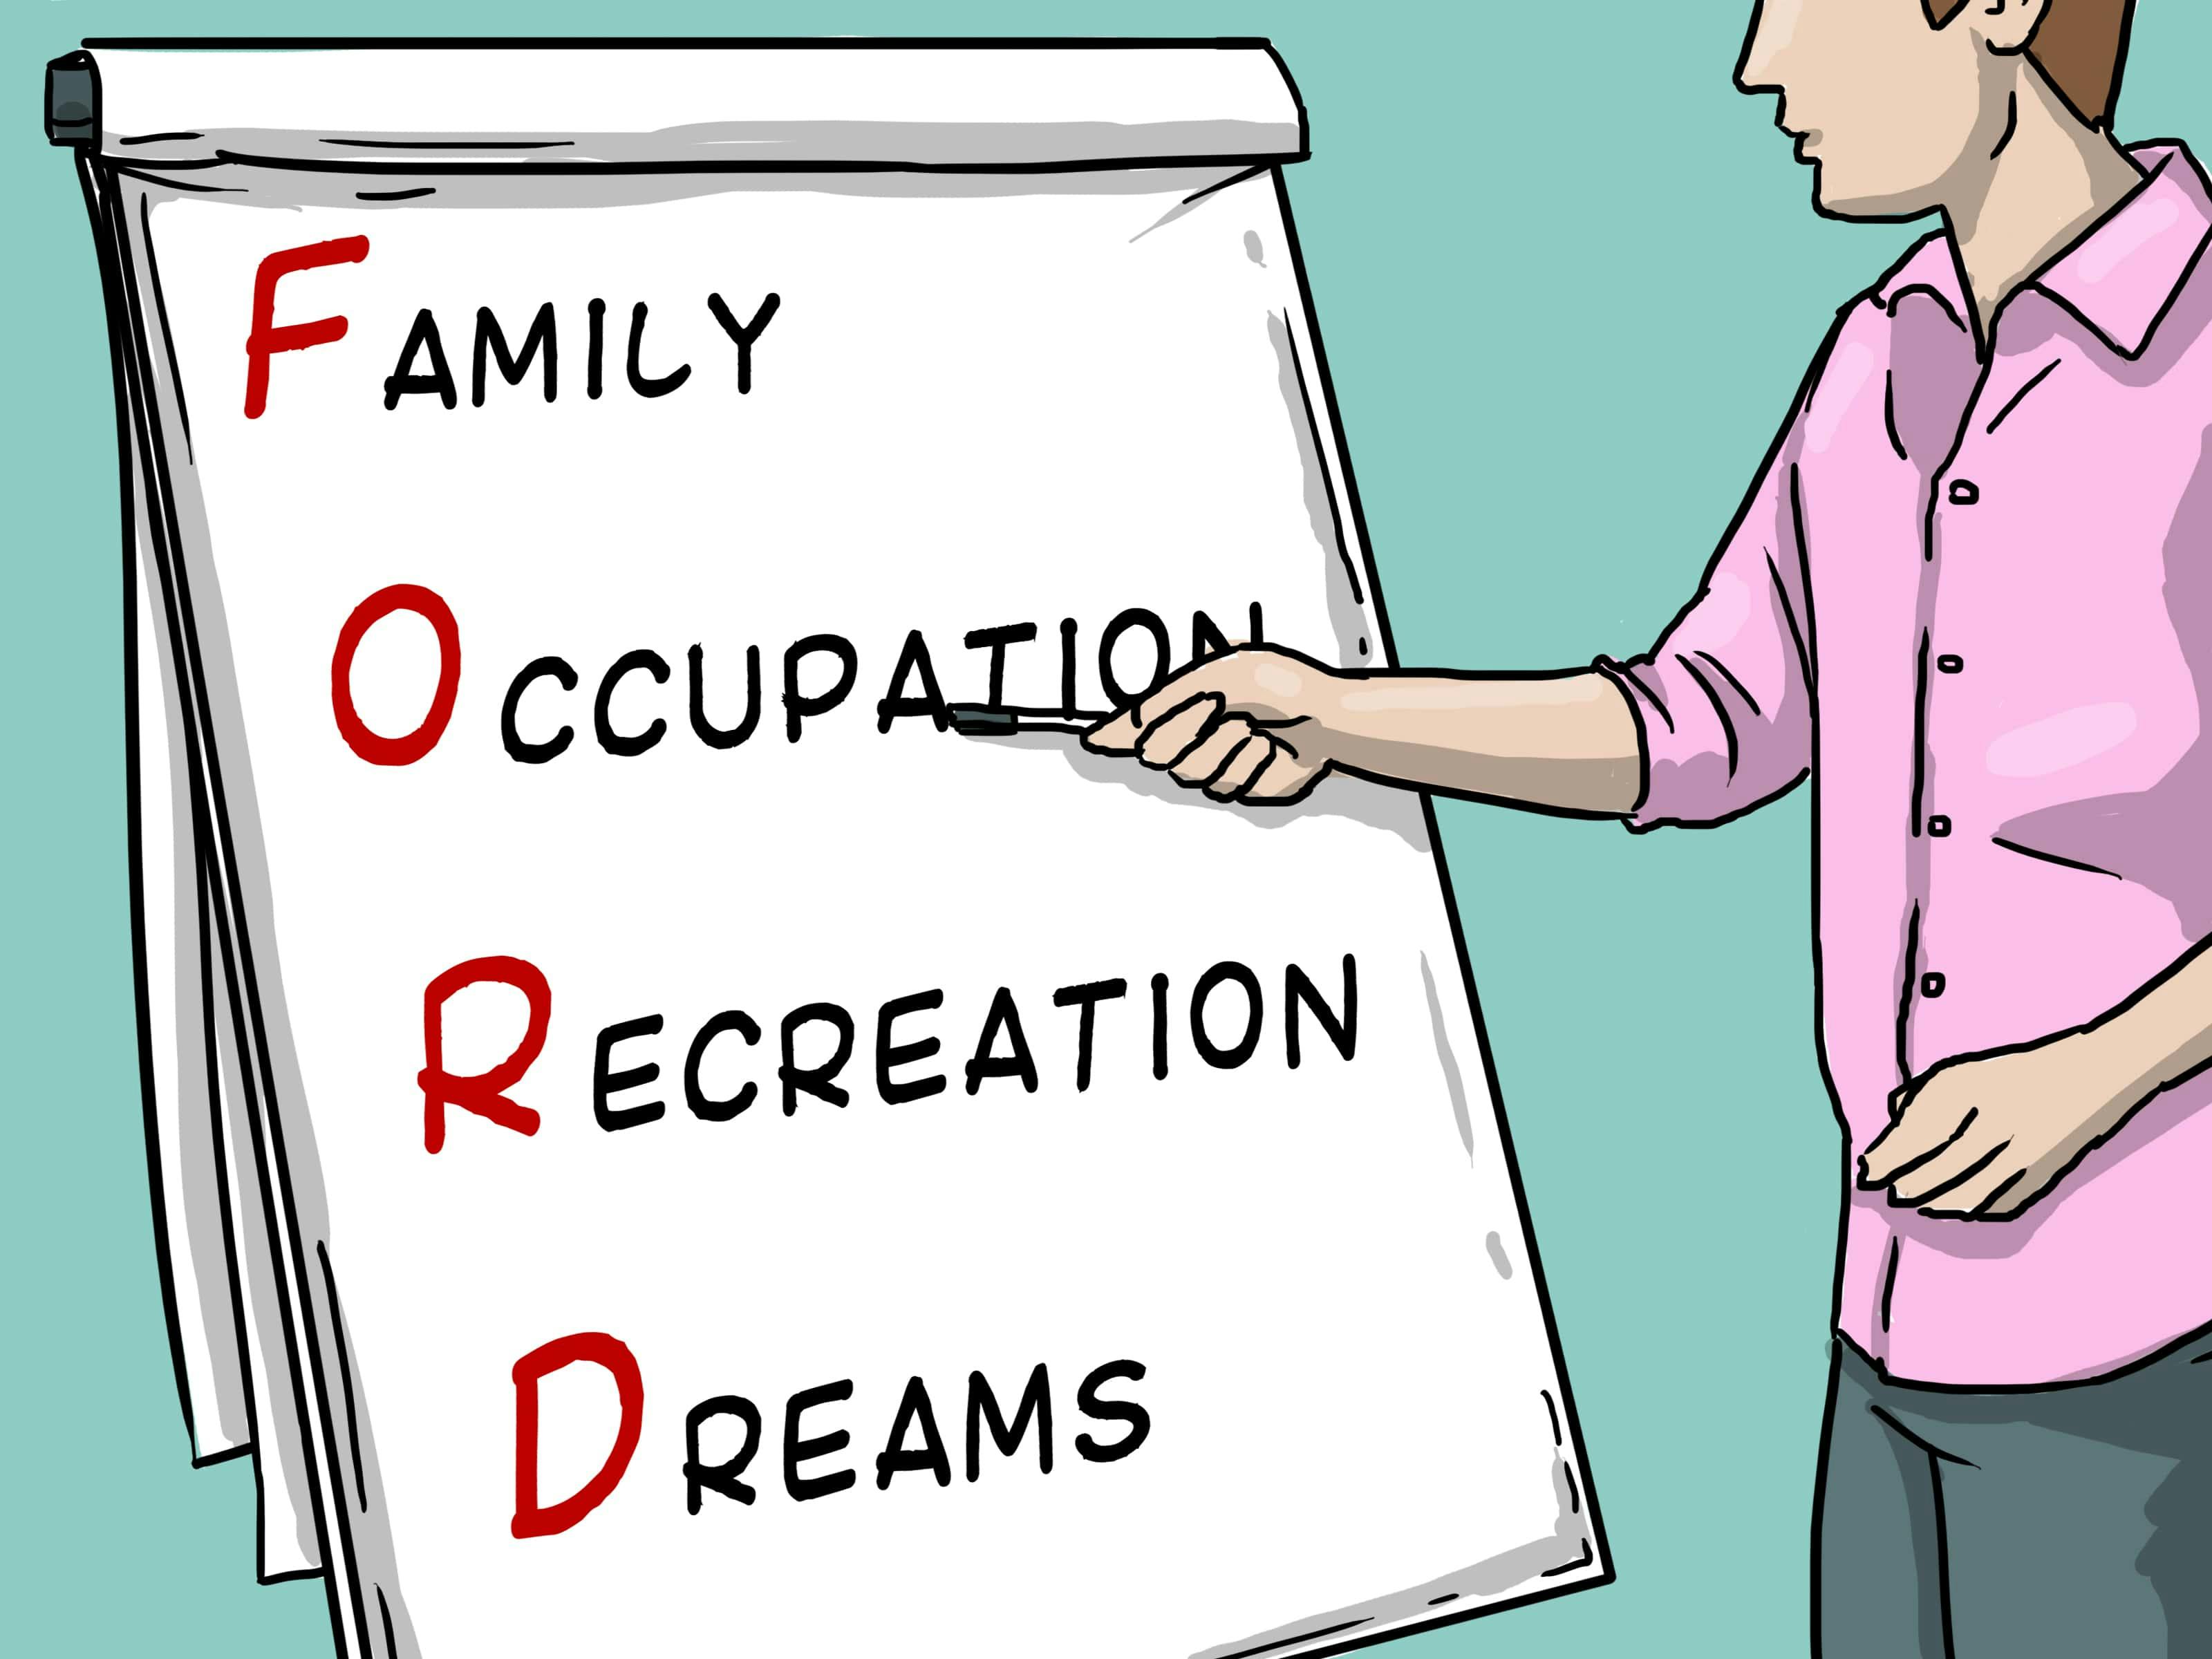 FORD: Family, Occupation, Recreation, Dreams